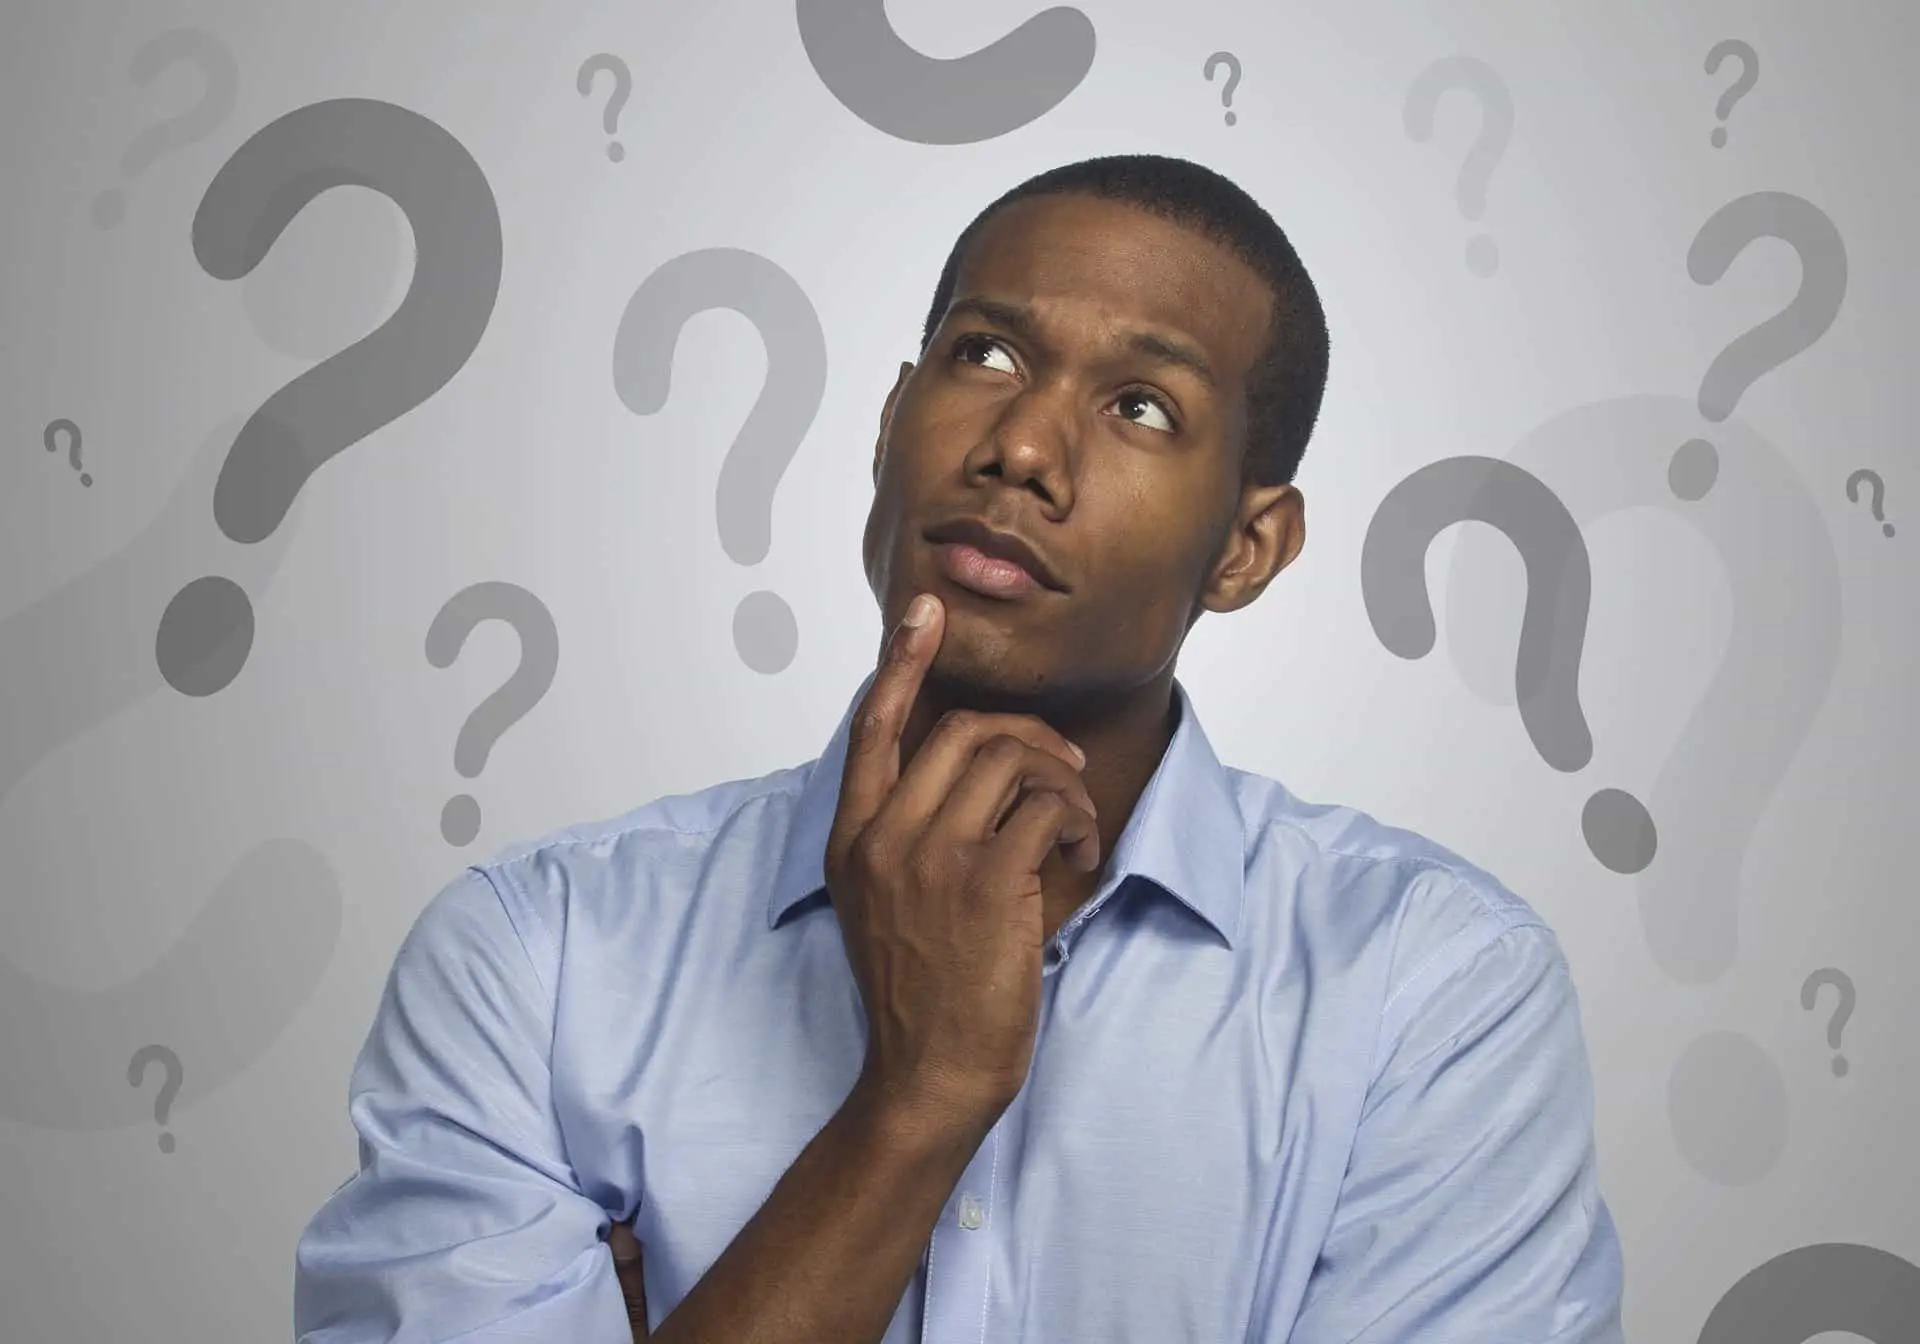 African American man thinking with question marks behind him